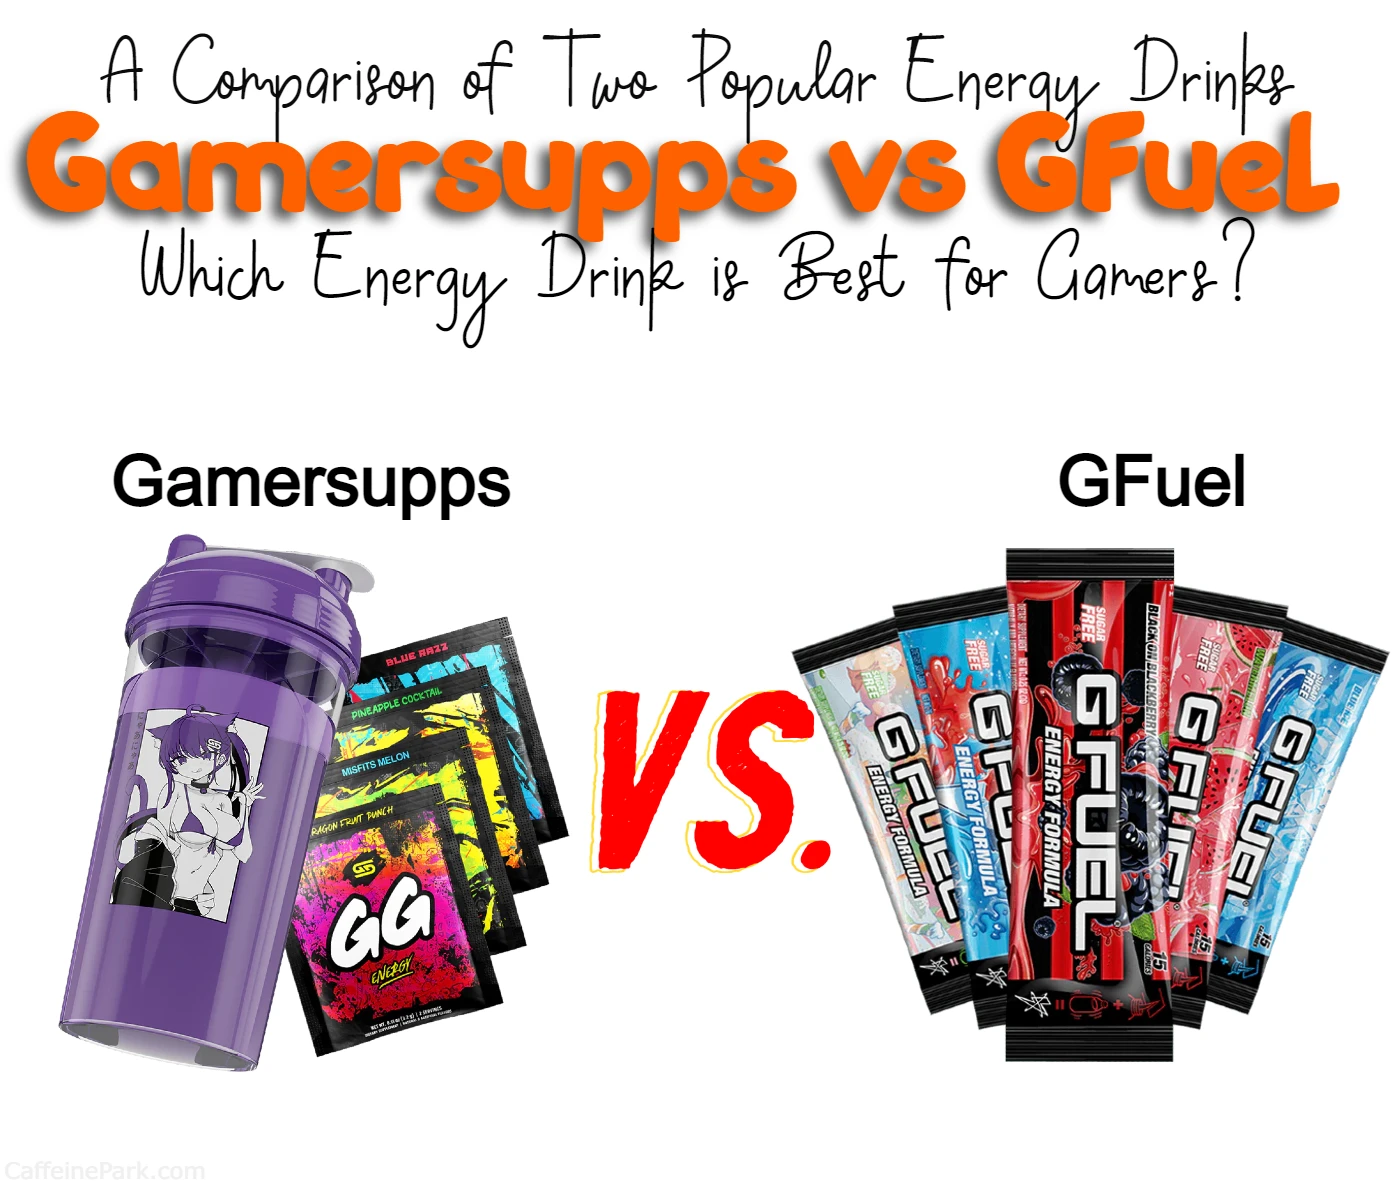 Differences between GFuel and Gamersupps